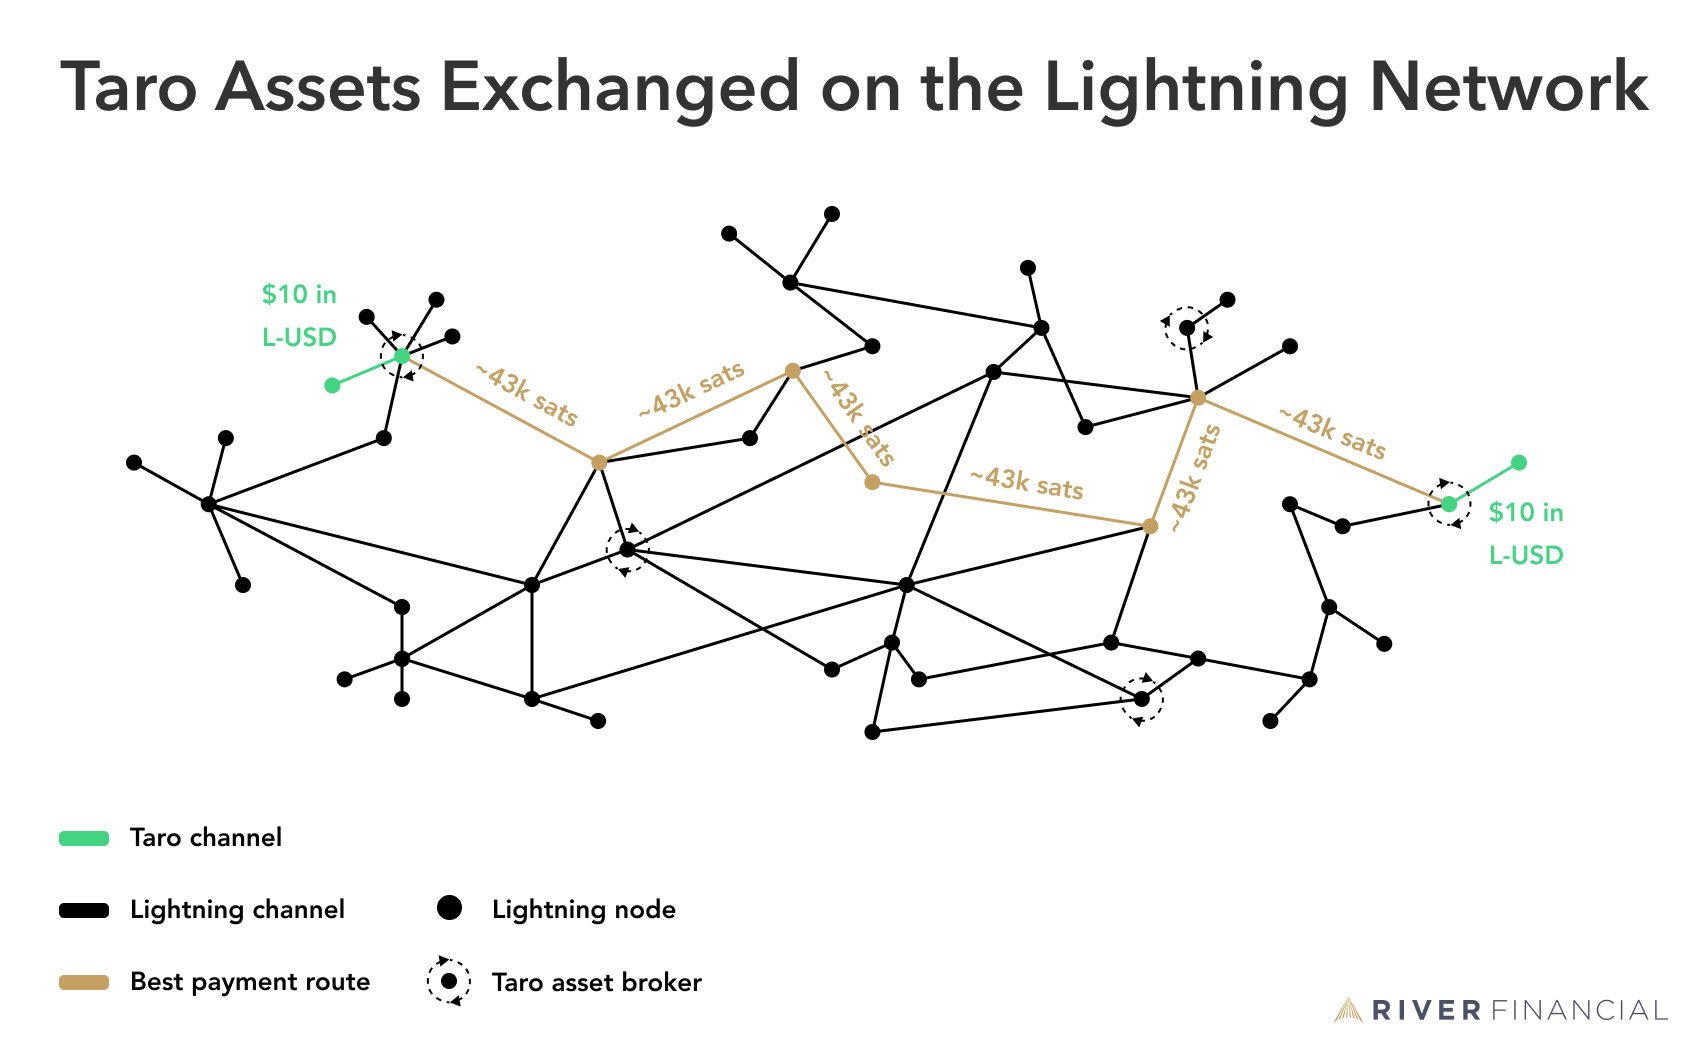 Taro Explainer: A Proposed Protocol That Will Allow the Issuance of Digital Assets on the Bitcoin Blockchain That Can Be Transferred Using the Lightning Network